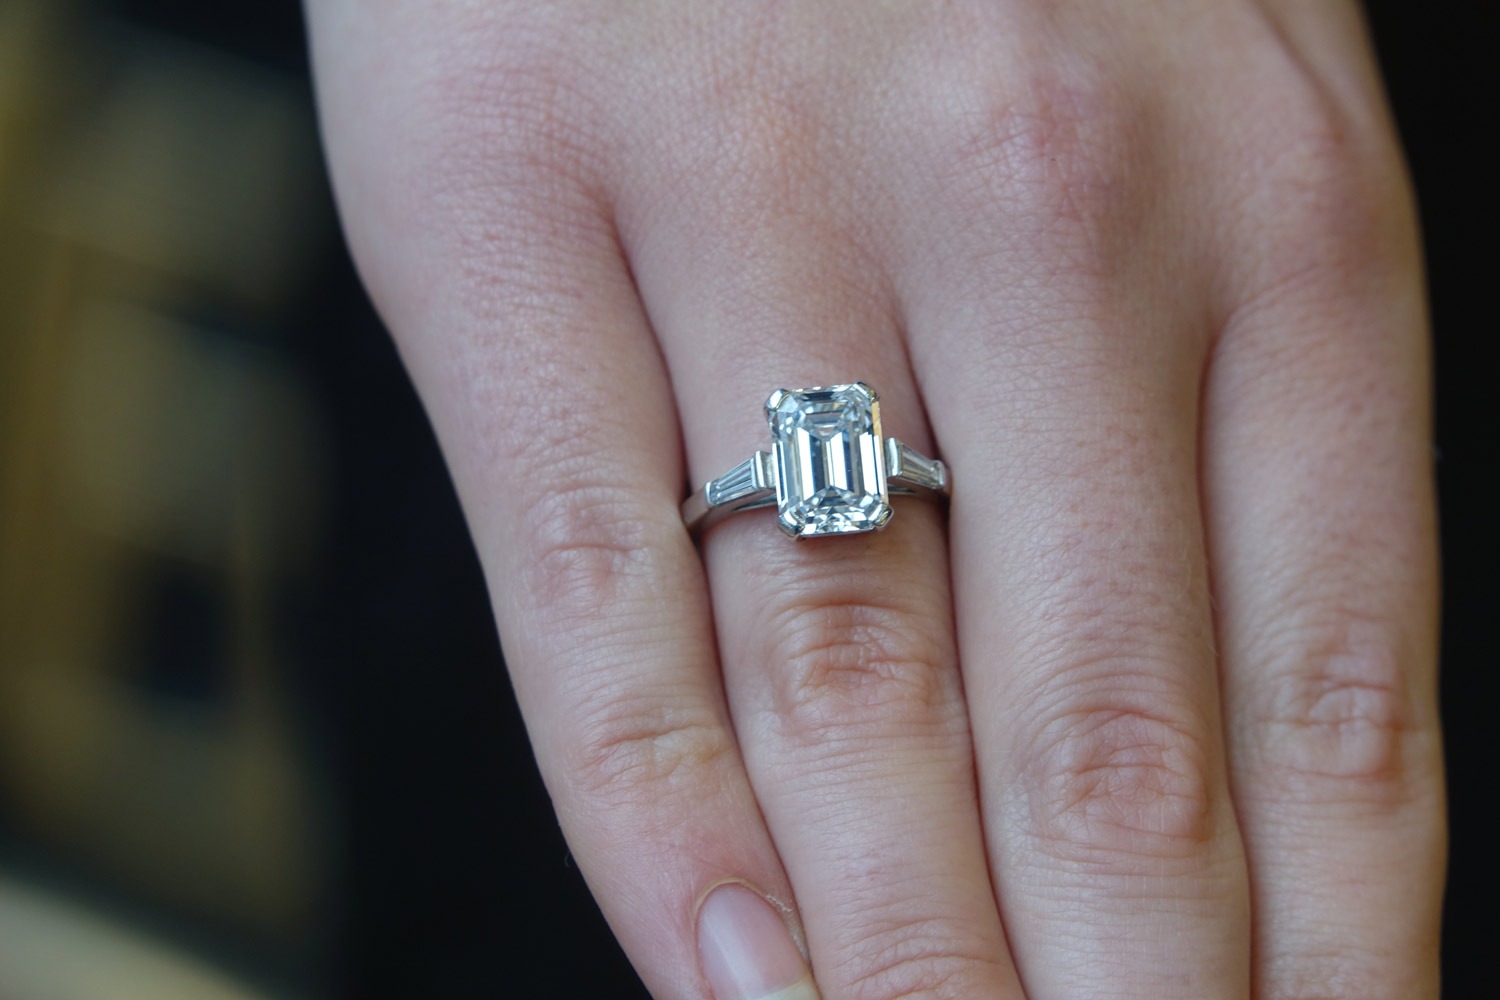 This beautiful stone is 4.19cts (to be precise) and has been classified by the GIA as flawless in clarity and D in colour, the most perfect you can get on the scale. It is set in a 4 claw platinum ring with tapered baguette shoulders and available at a price of £194,500